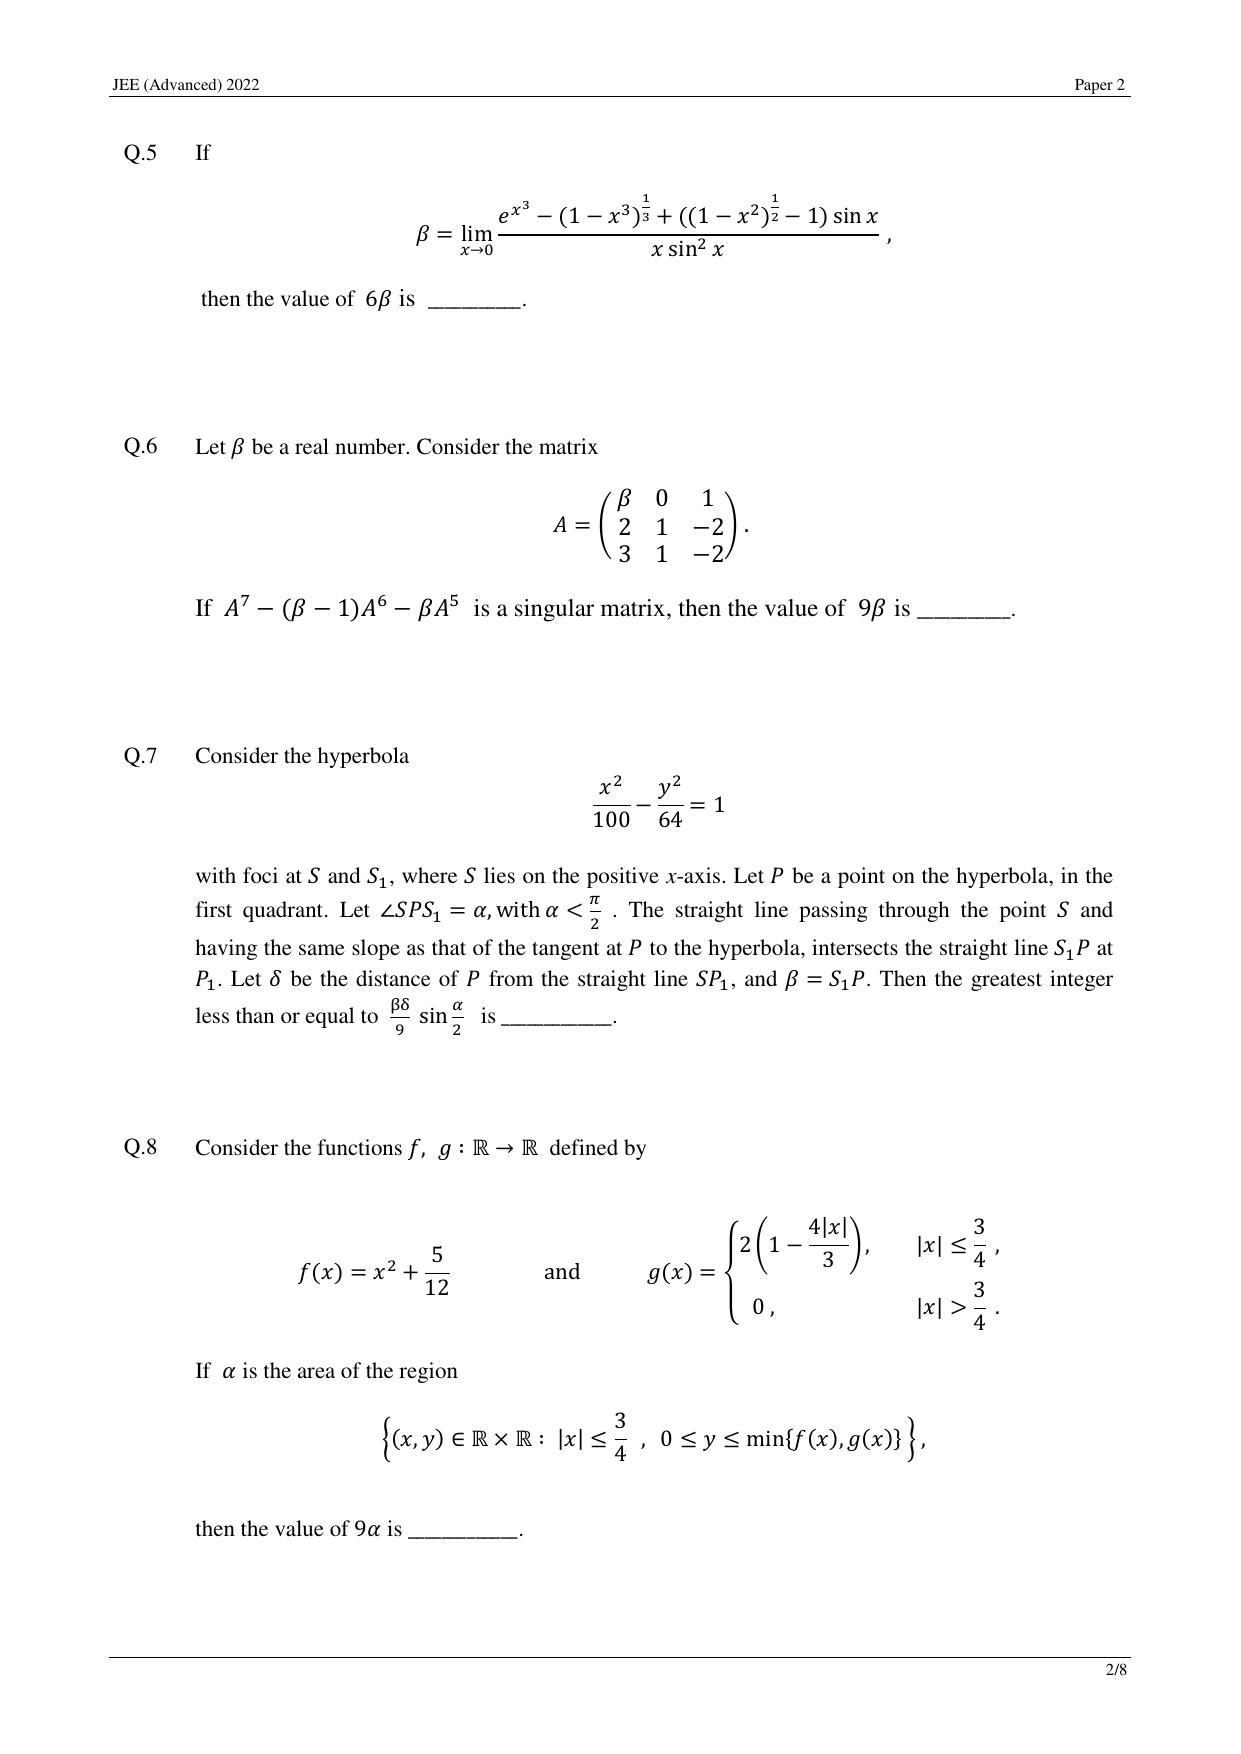 JEE (Advanced) 2022 Paper II - English Question Paper - Page 2